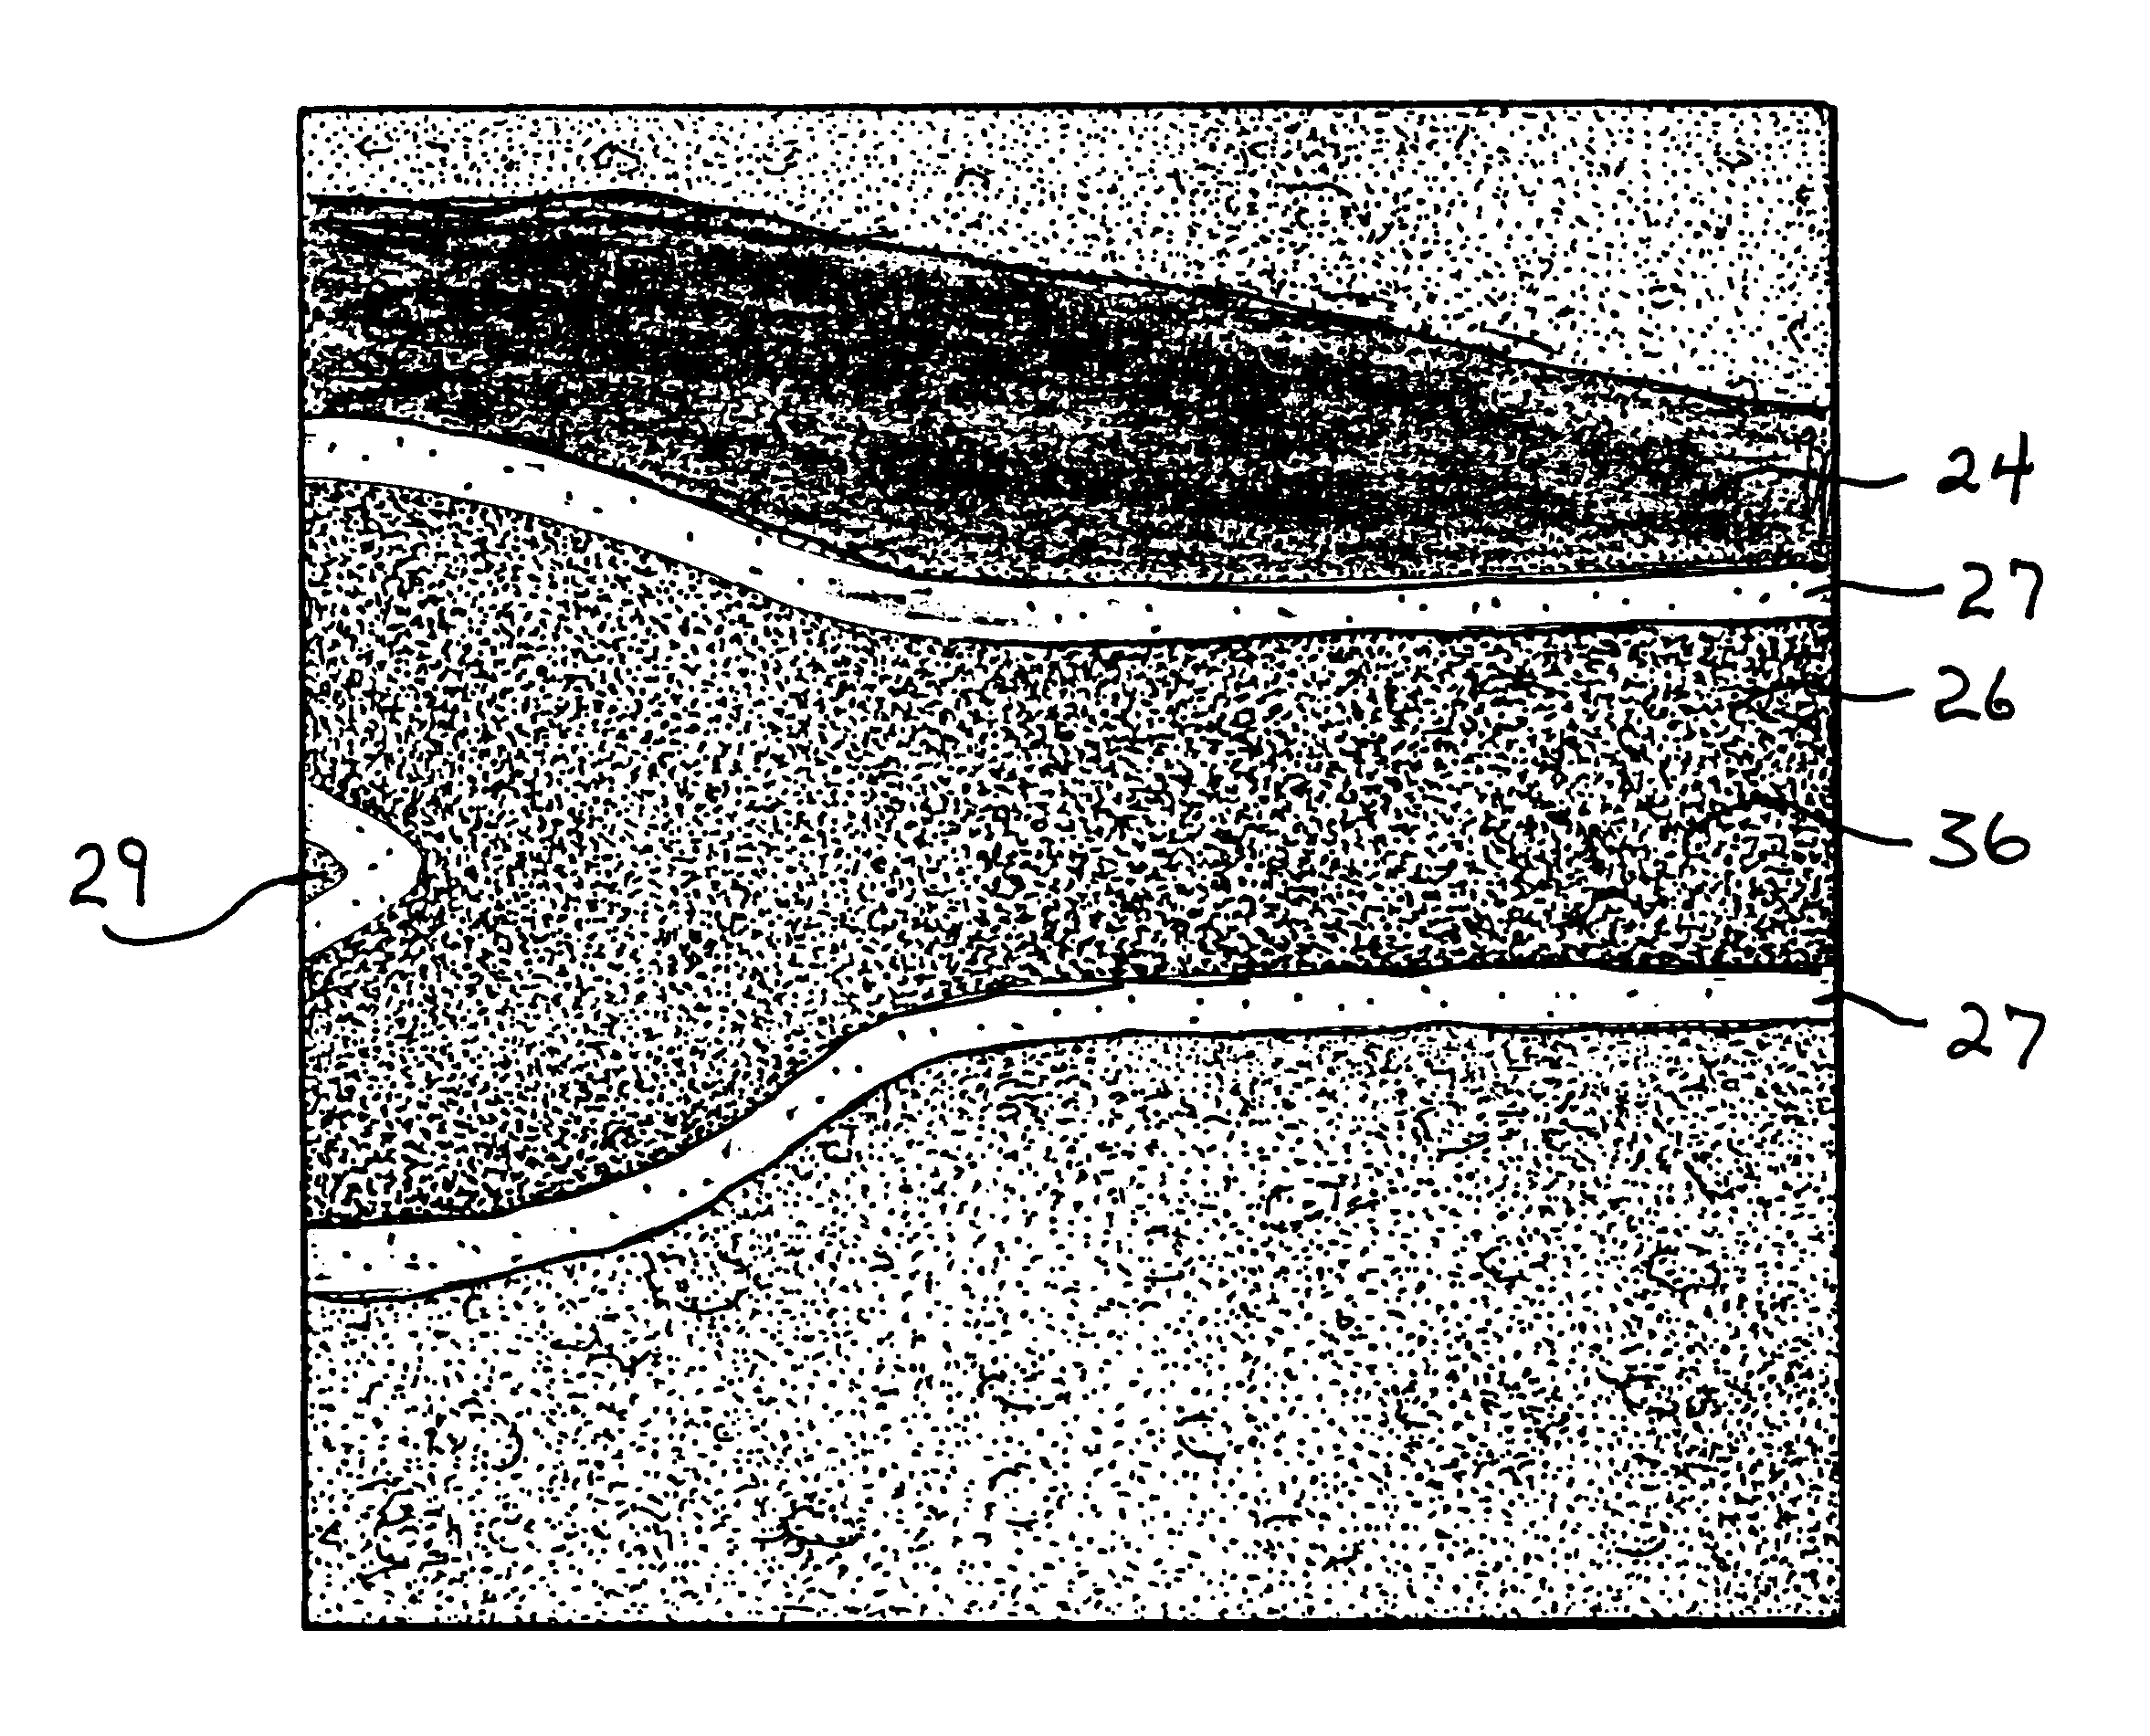 Split-screen display system and standardized methods for ultrasound image acquisition and processing for improved measurements of vascular structures